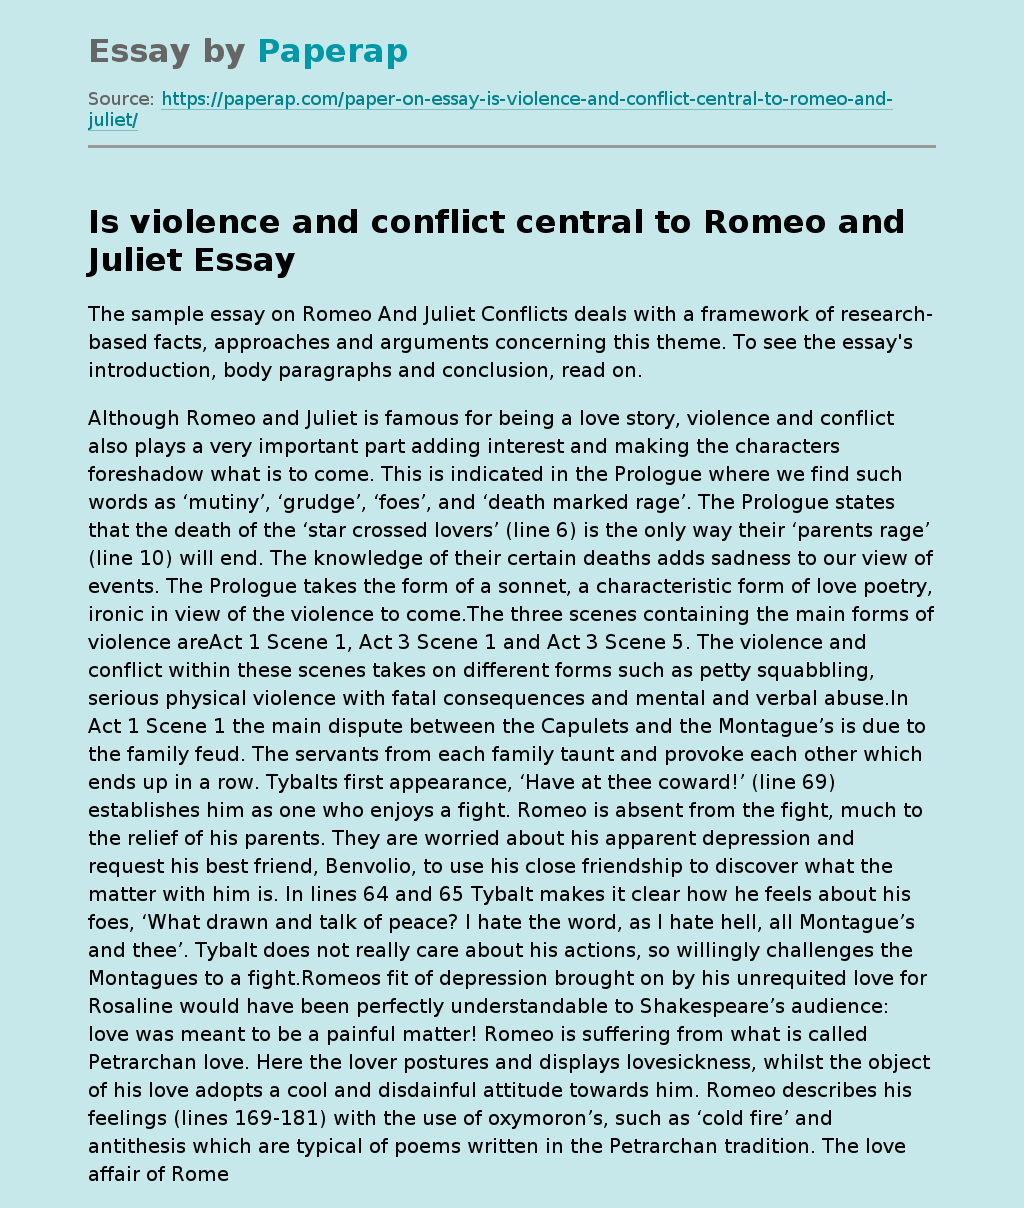 Is Violence and Conflict Central to Romeo and Juliet